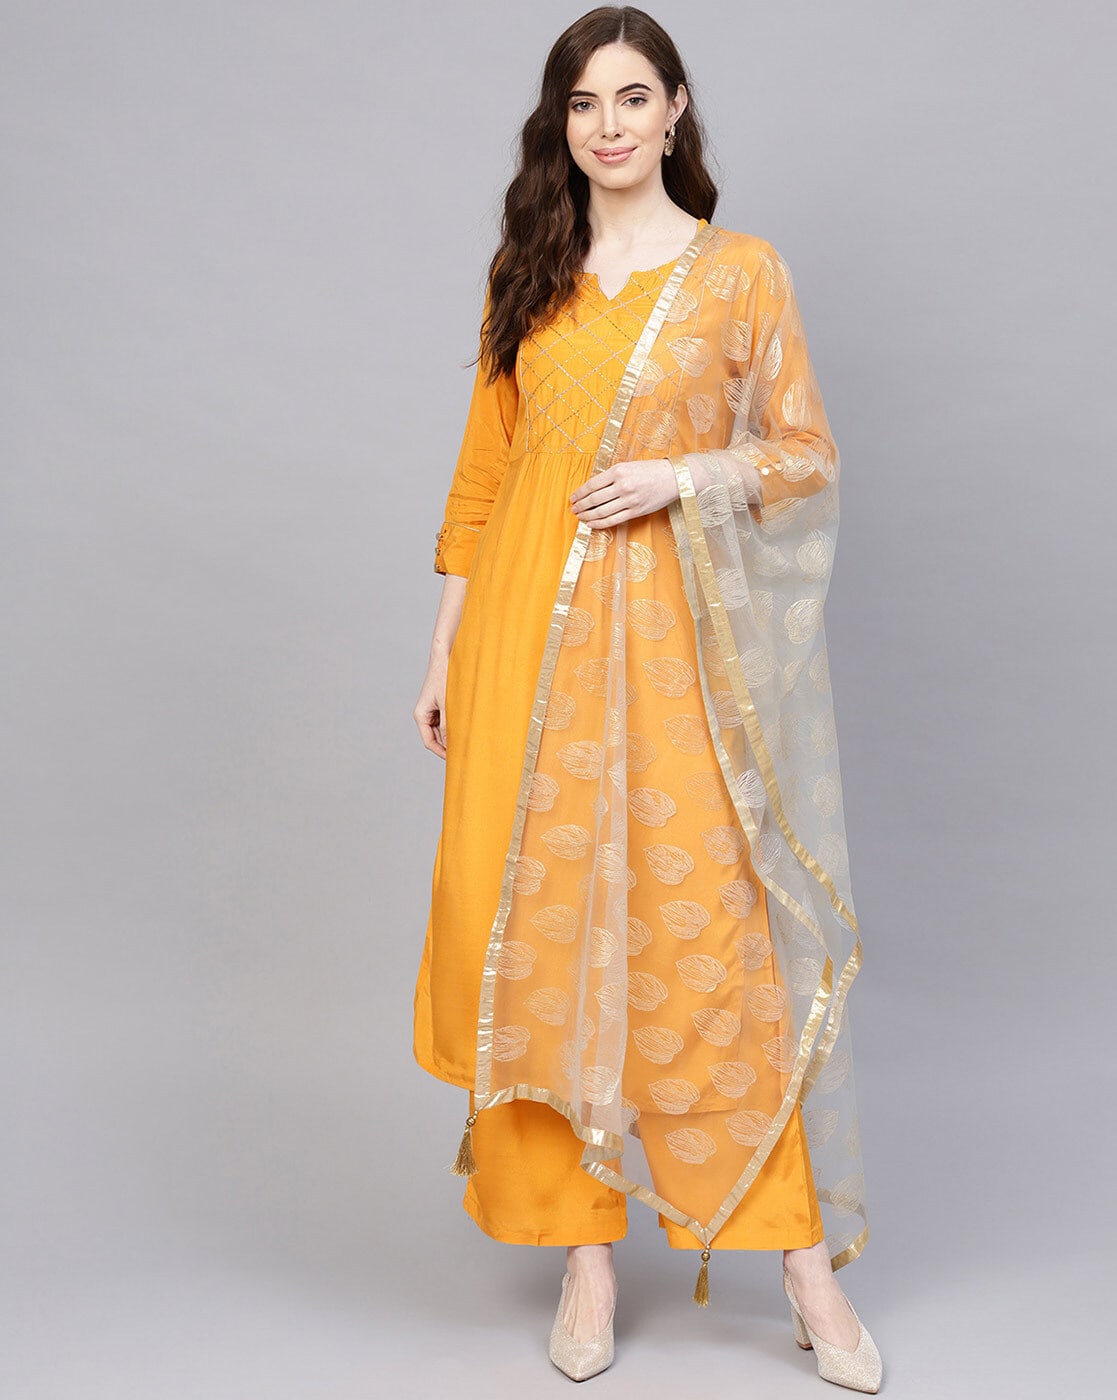 Ladies Yellow Straight Long Kurti With Pant And Dupatta, Size: S, M, L, XL  at Rs 650/piece in Jaipur